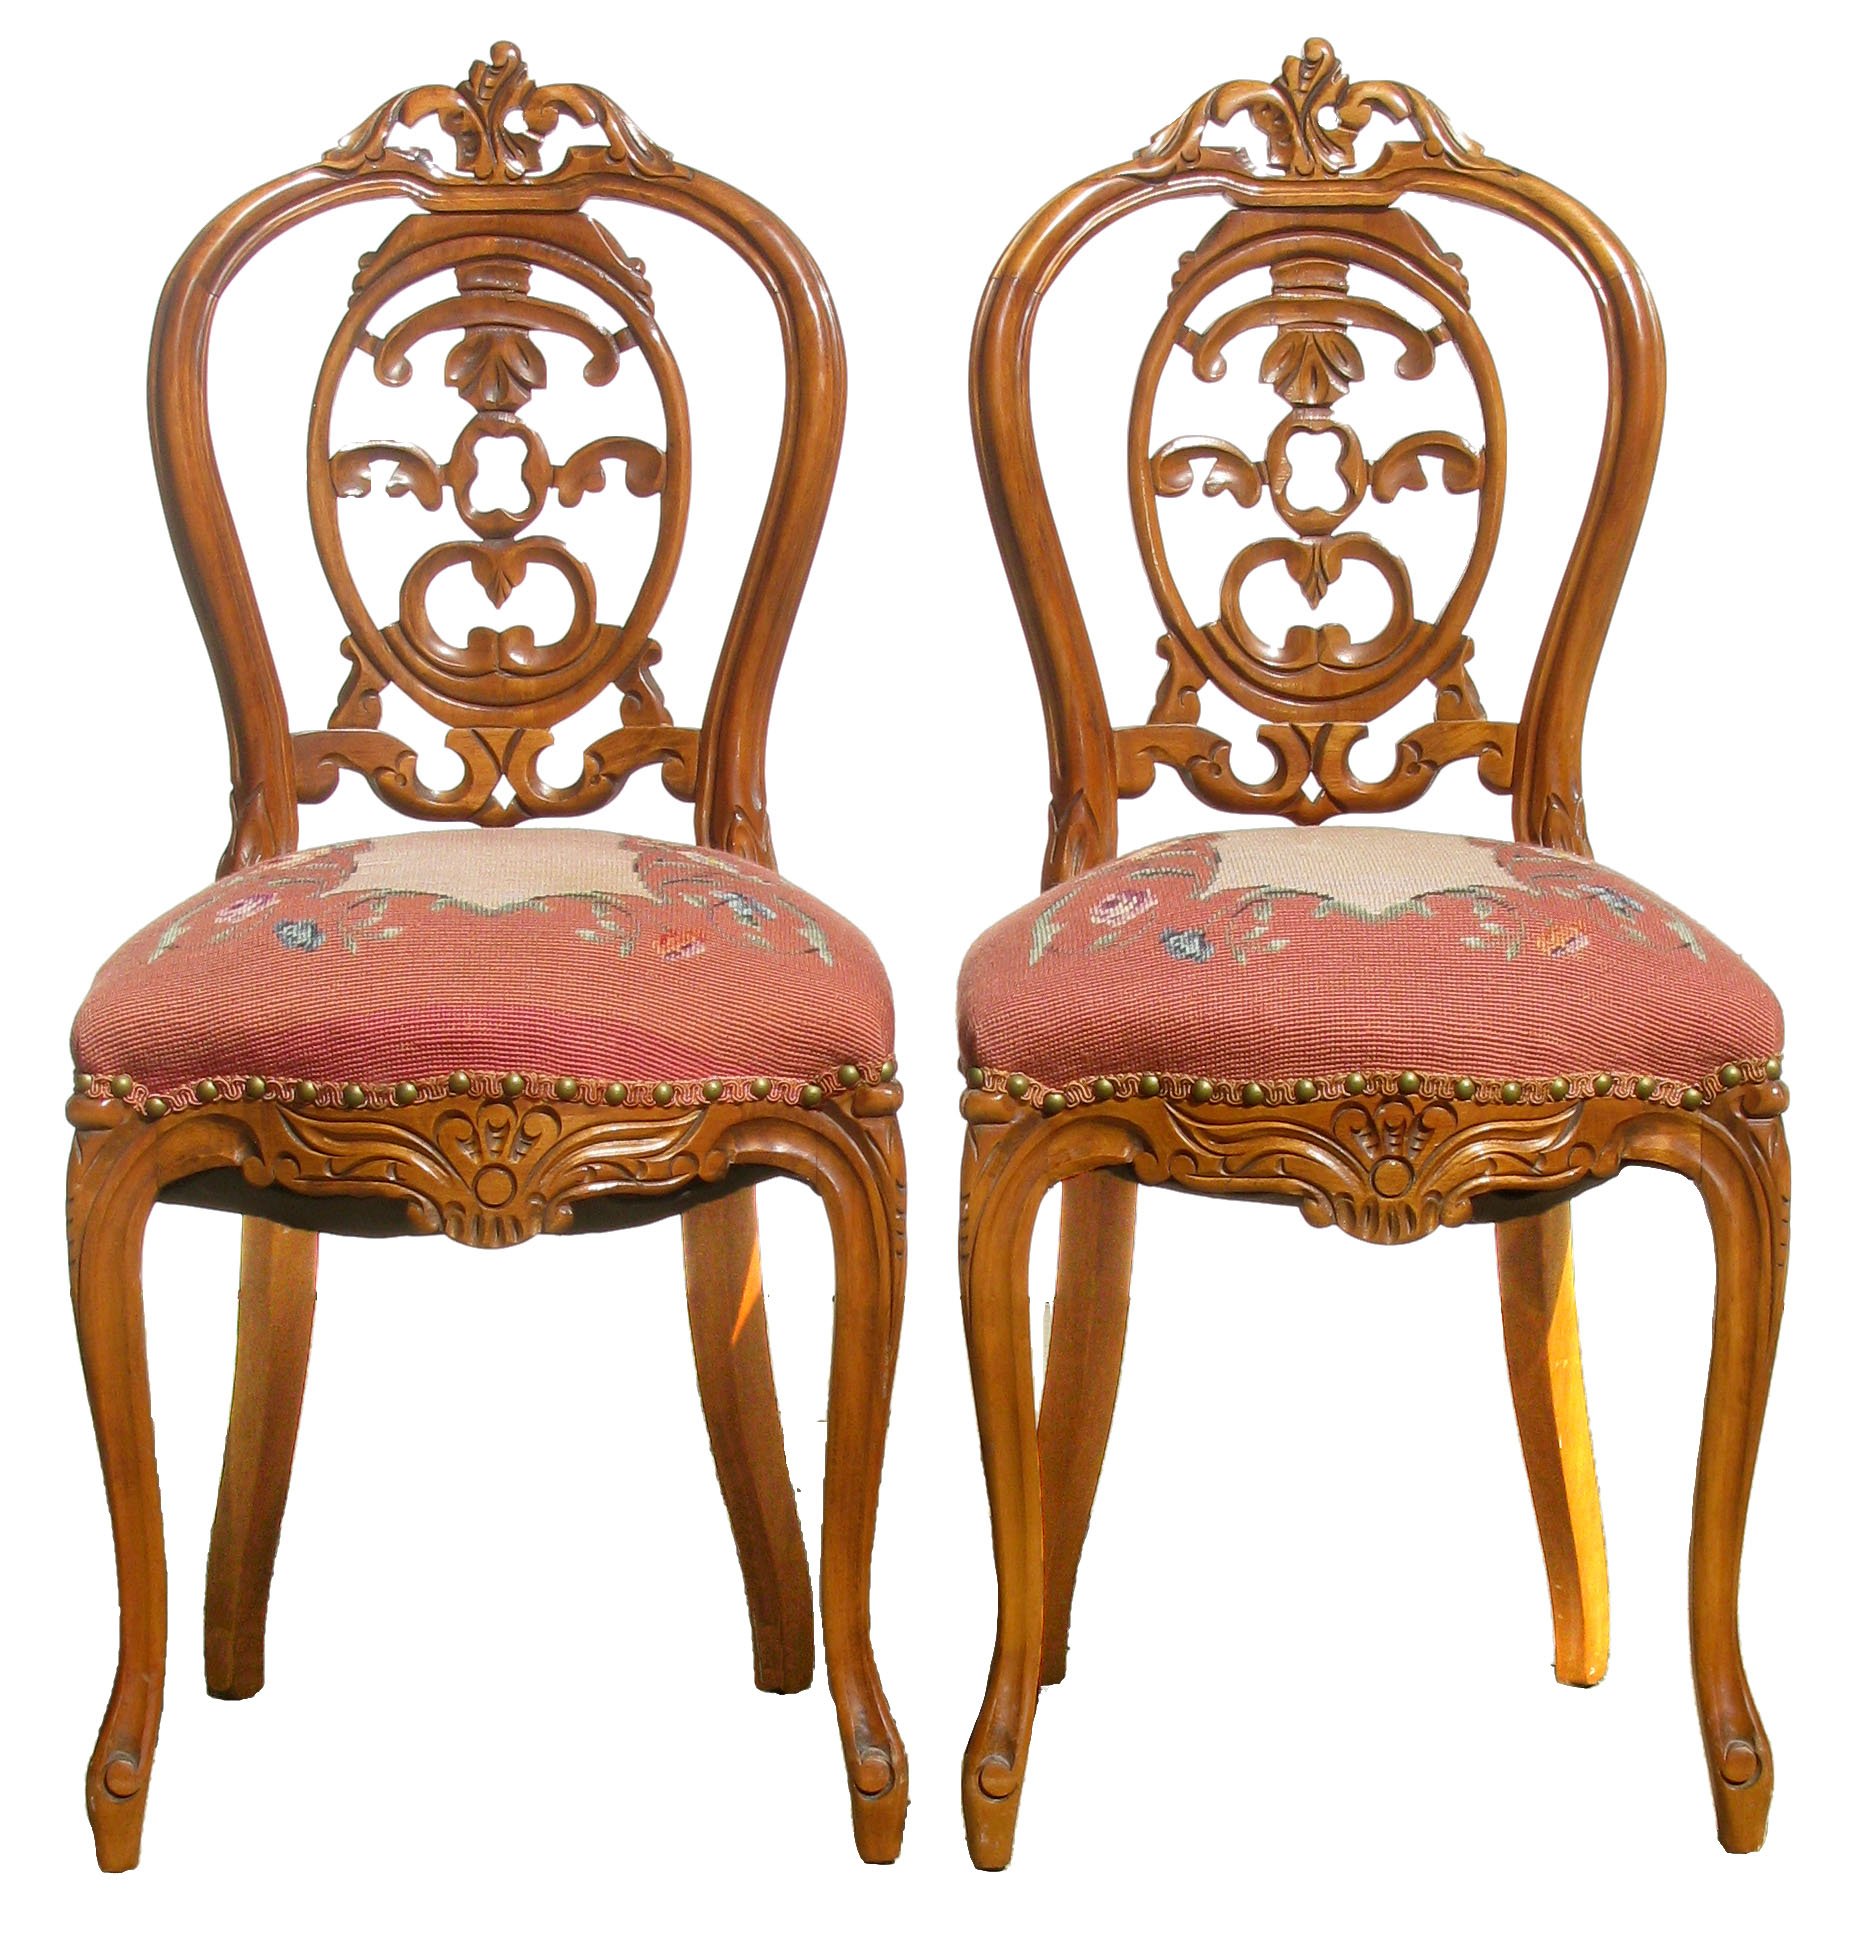 Carved Wood/Needlepoint Chairs, Pair~P77638776